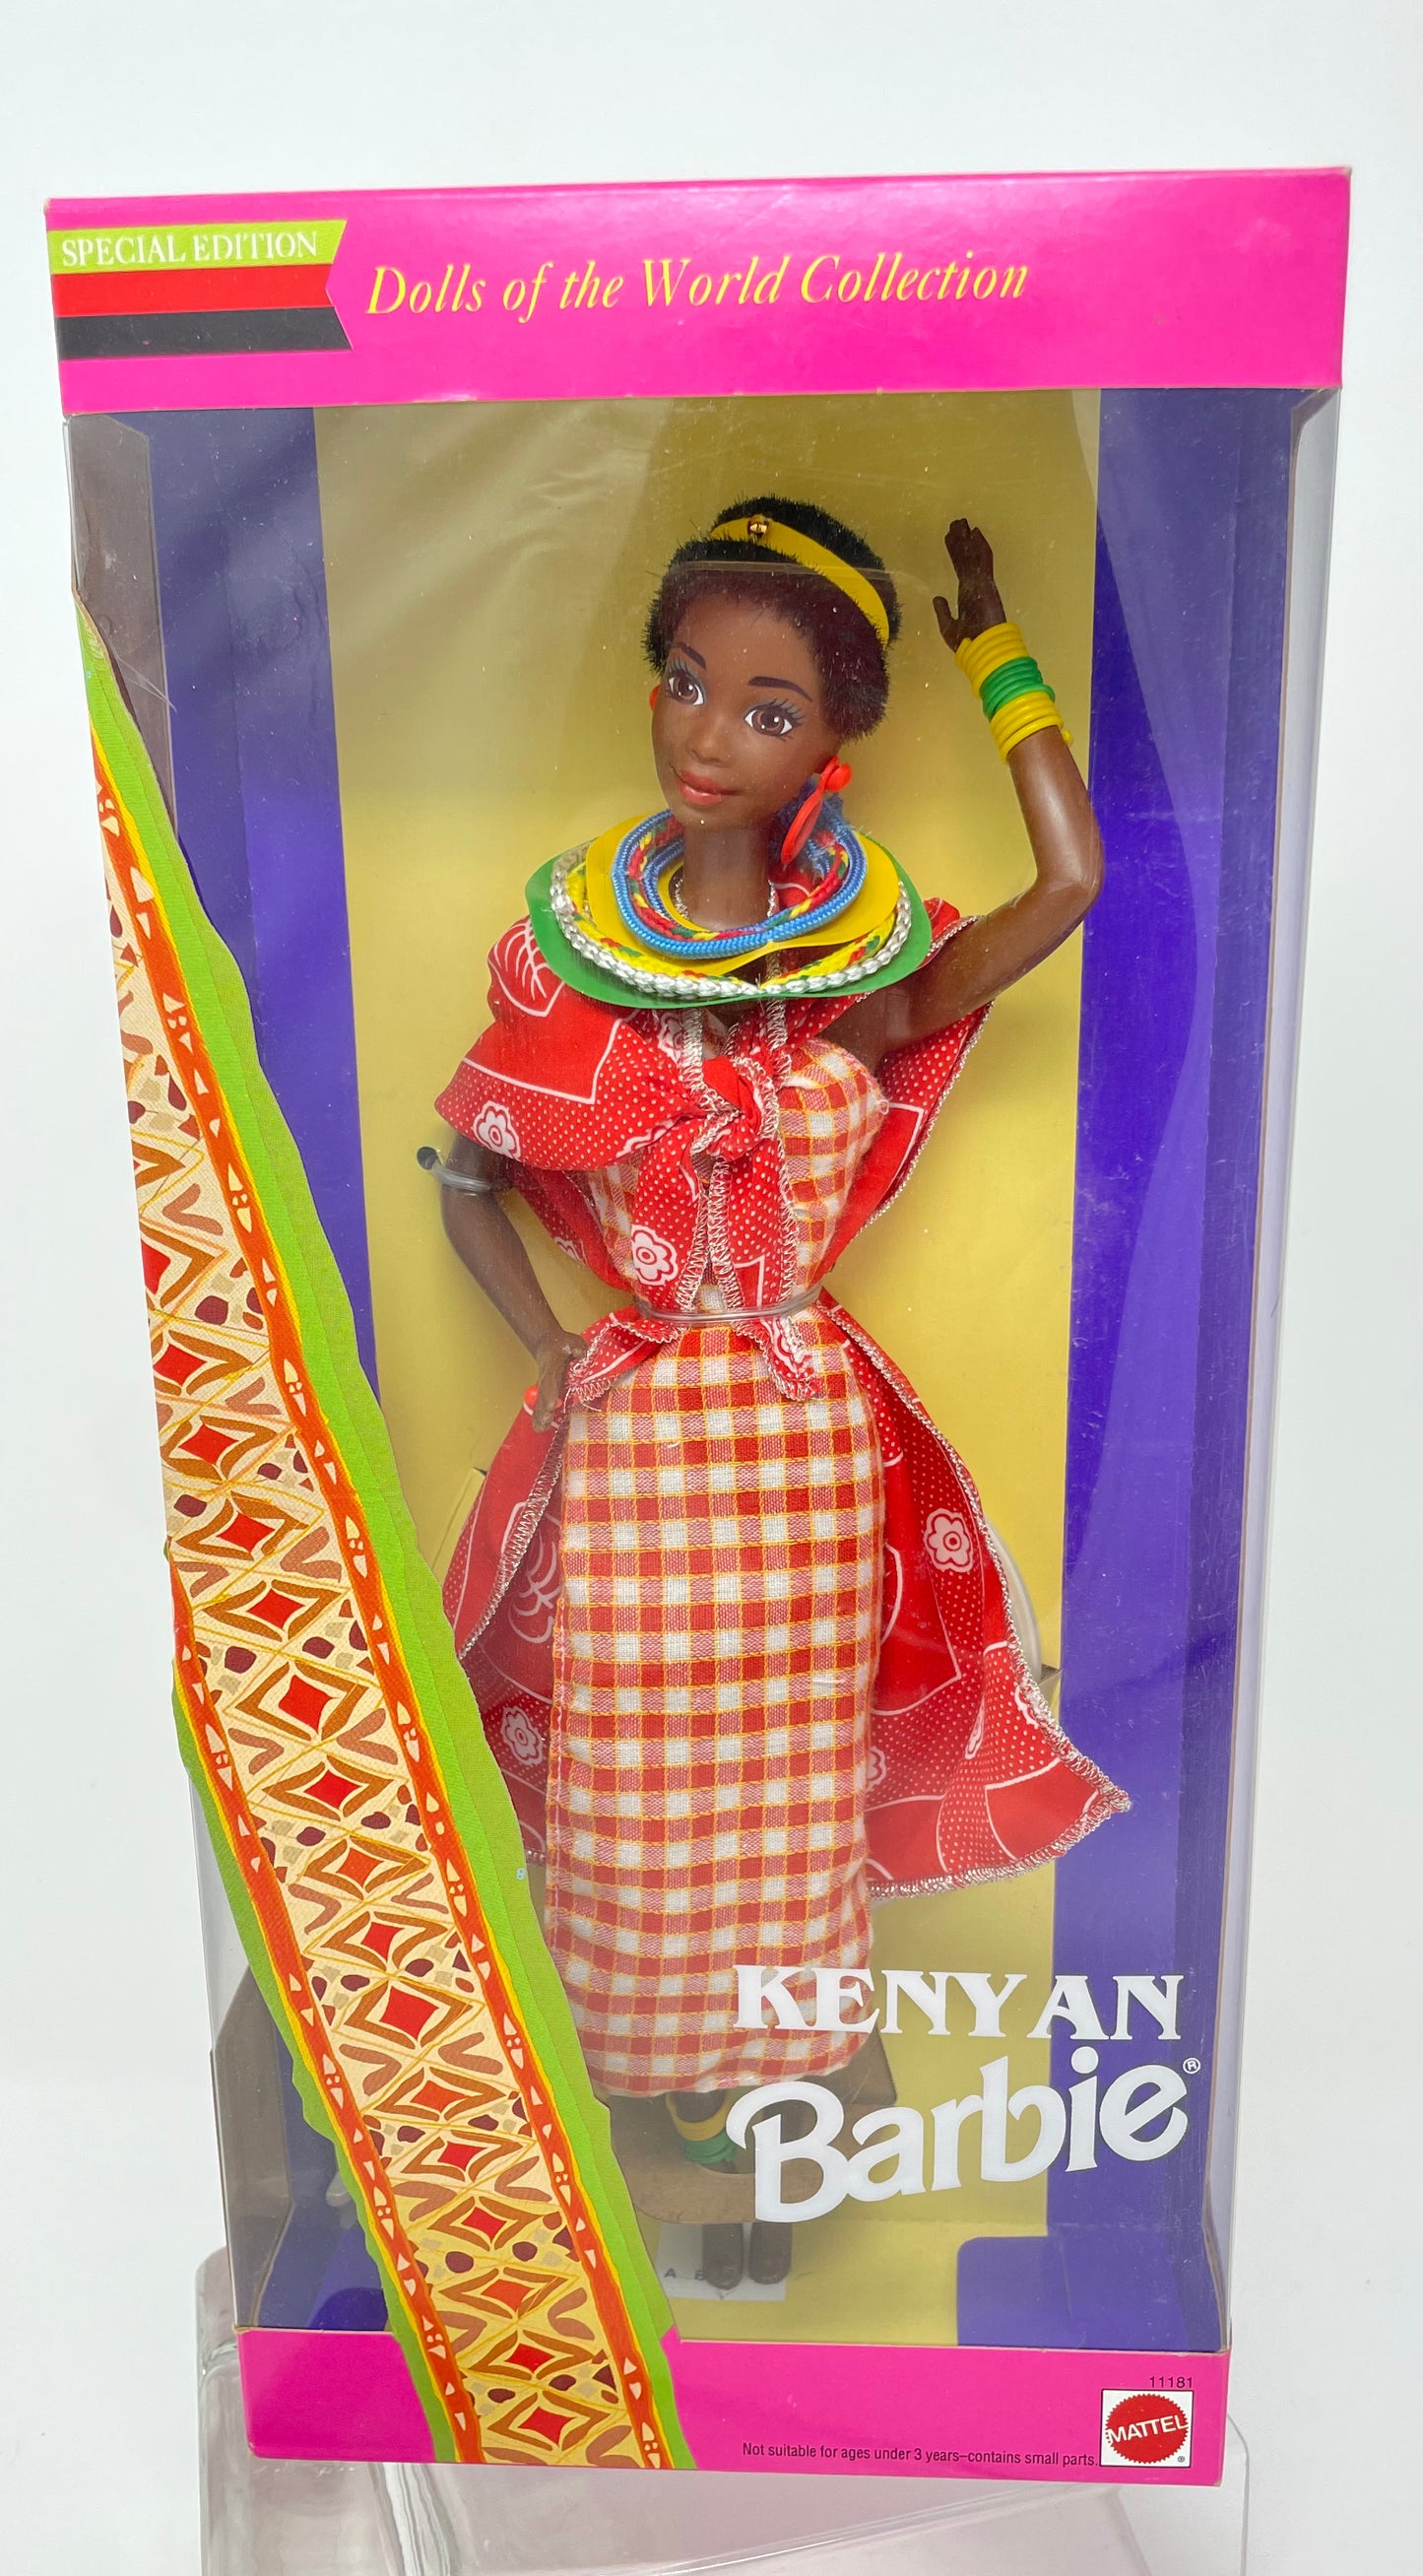 KENYAN BARBIE - DOLLS OF THE WORLD COLLECTION - SPECIAL EDITION - #11181 - MATTEL 1993